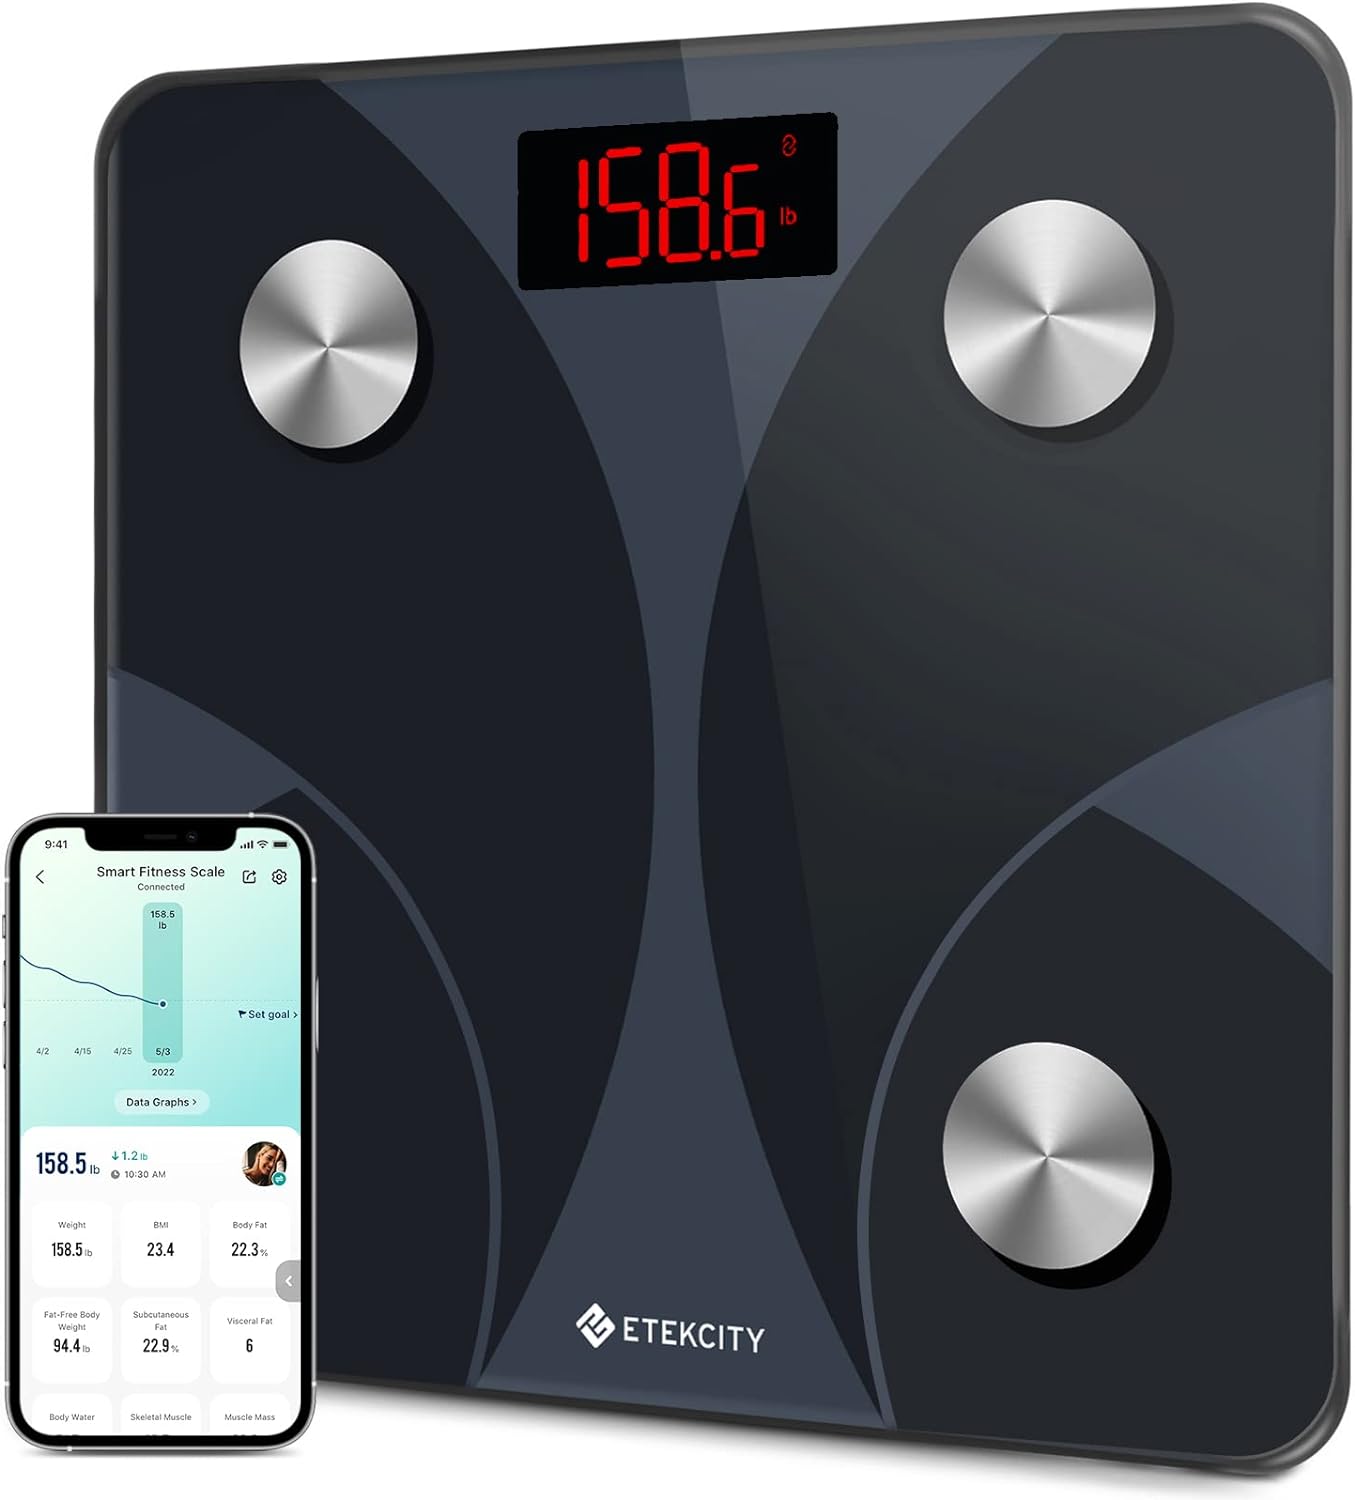 Etekcity FSA HSA Store Eligible Smart Scale for Body Weight Fat, Digital Bathroom Weighing Machine for Accurate BMI Muscle Mass Composition, Home Use Apple Health Compatible Fitness Equipment